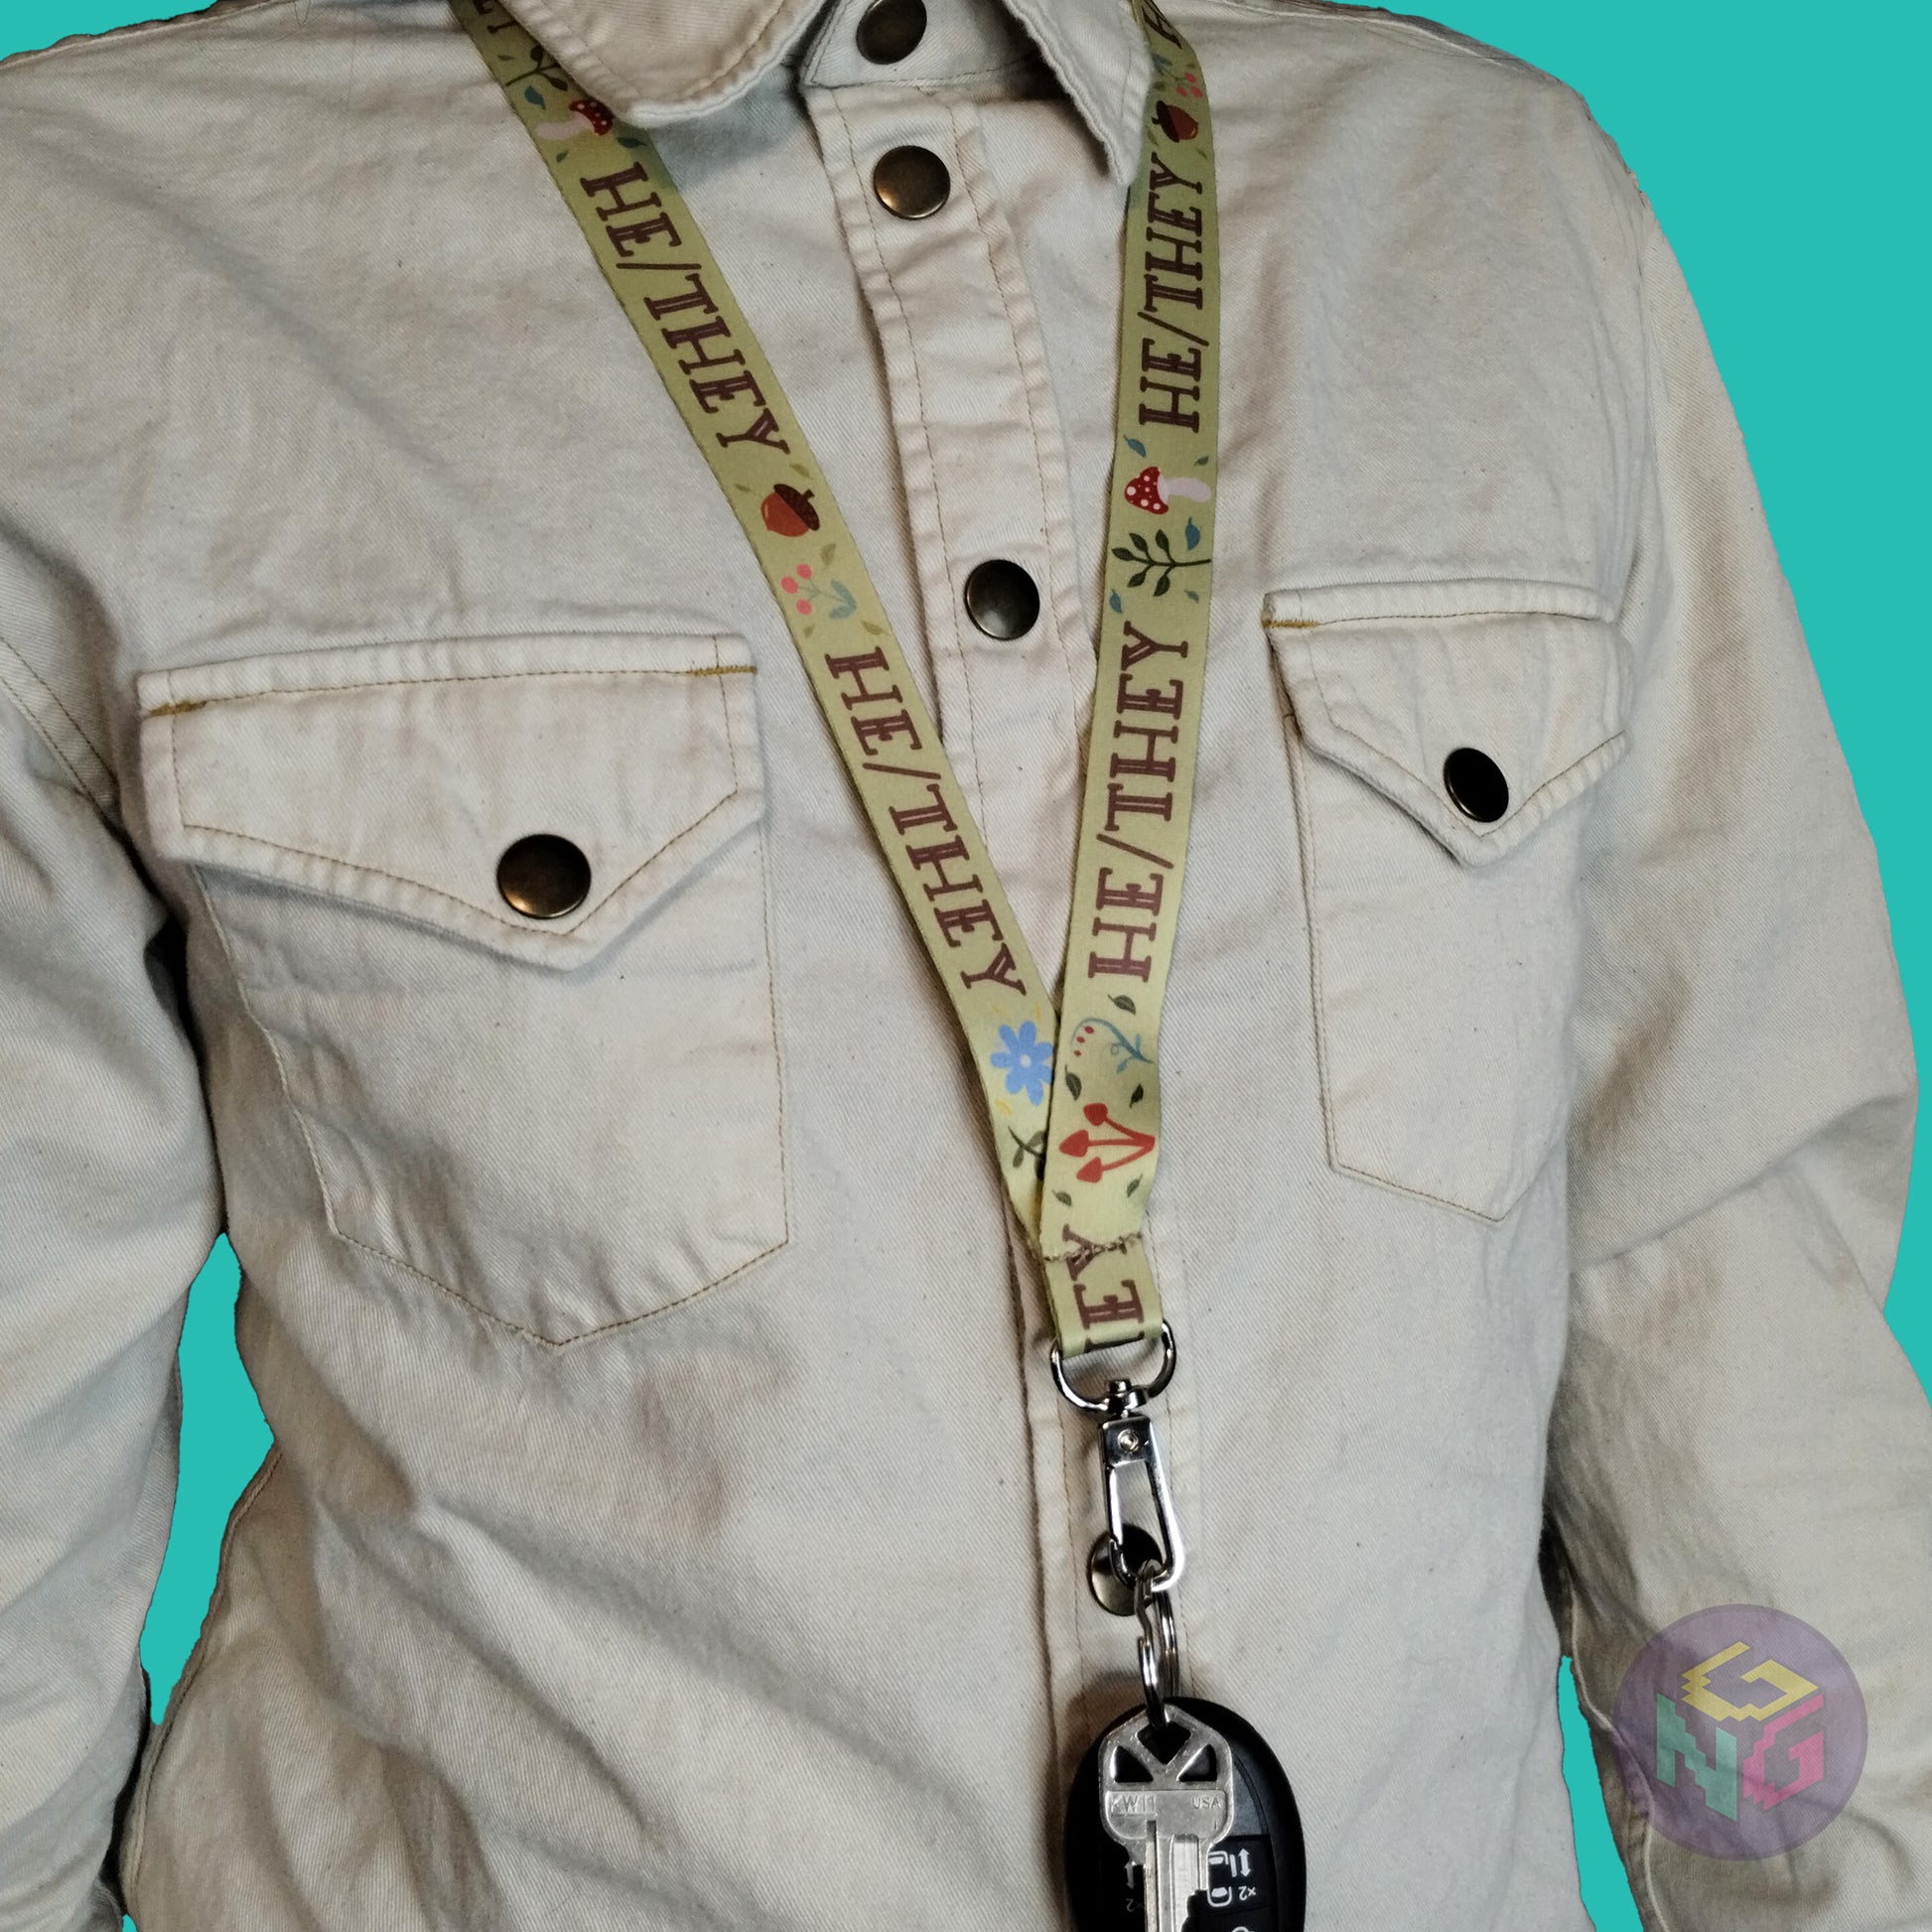 green he they mushroom lanyard being worn by a flat chested person wearing a cream button up. The end of the lanyard falls between their sternum and bellybutton and has a key fob clipped to the end